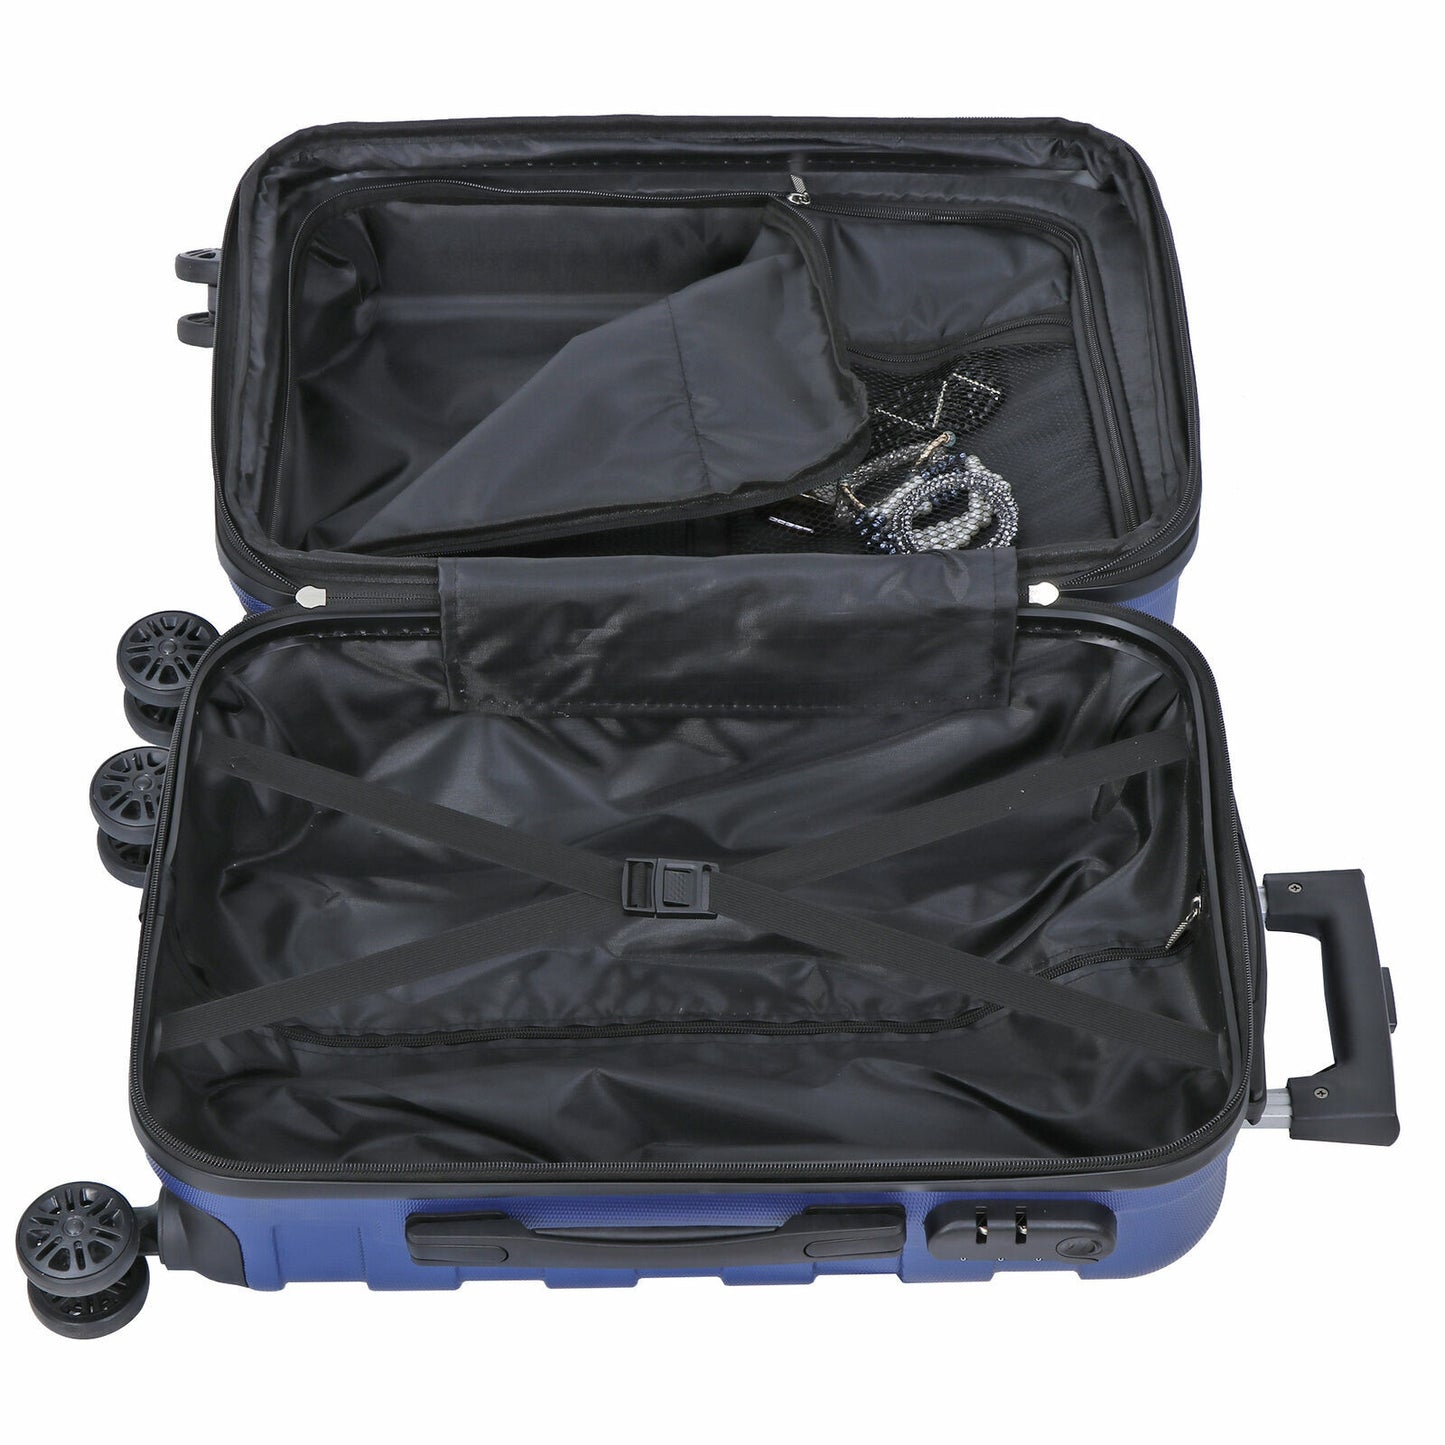 21 Inch Spinner Carry-on Luggage Suitcase Expandable Travel Bag Hardside